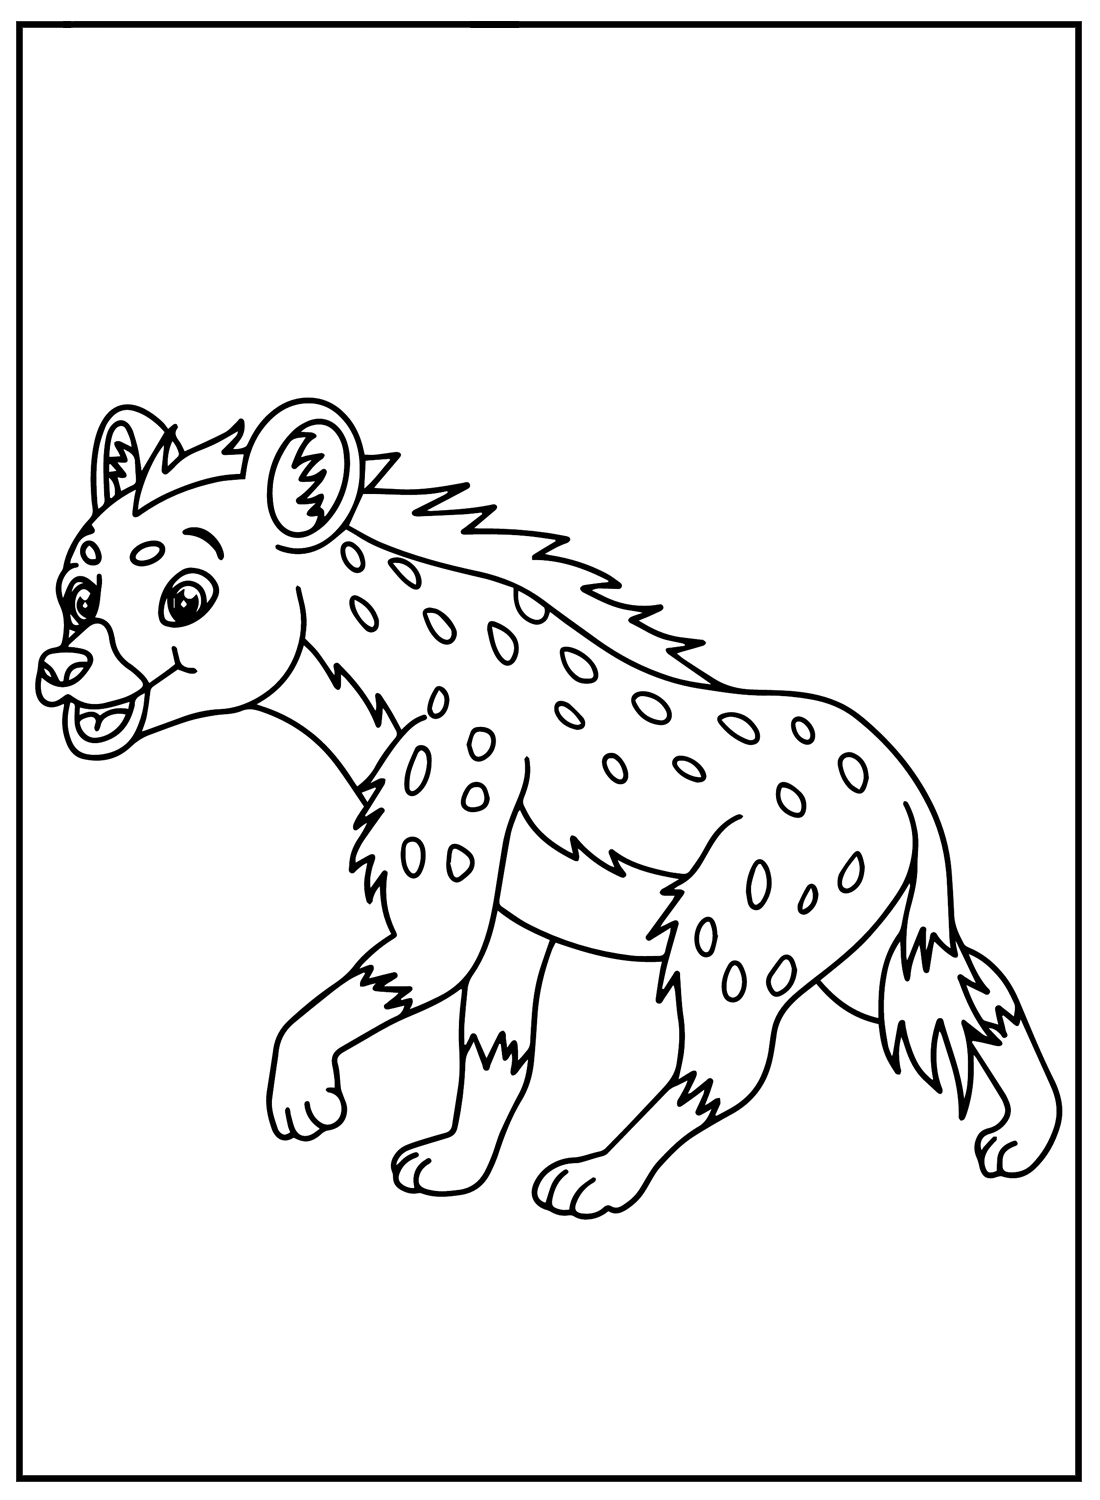 A Hyena Laughing Coloring Page